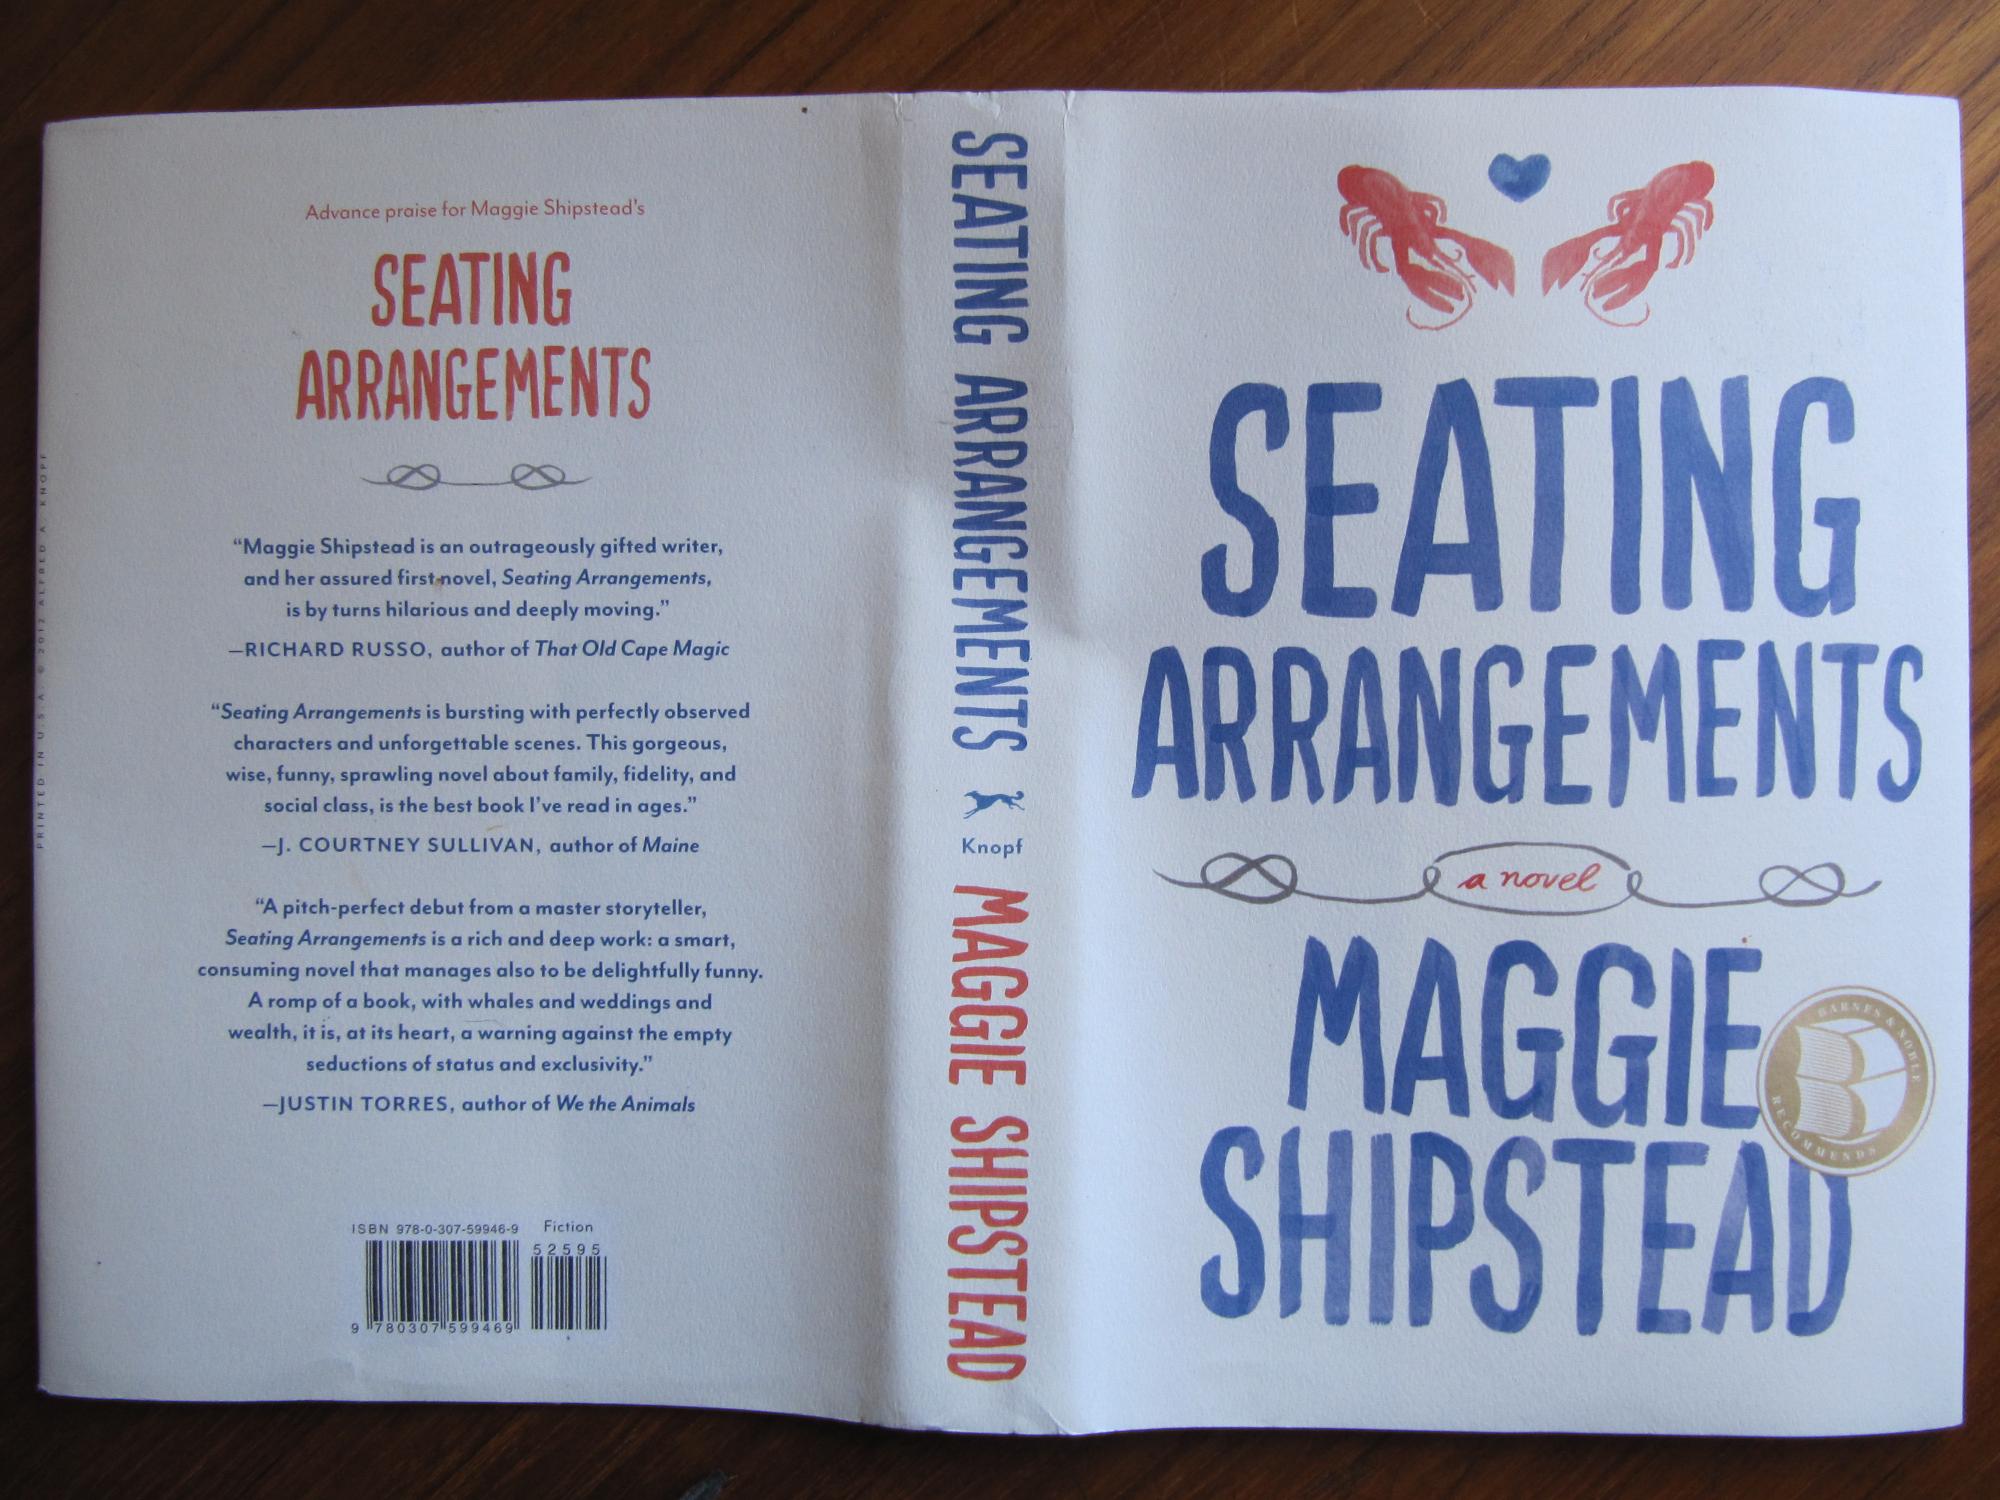 SEATING ARRANGEMENTS; [091] **{FIRST EDITION ~ AS NEW ~ UNREAD or GENTLY READ}** [091] - SHIPSTEAD, MAGGIE: *S-P-E-C-T-A-C-U-L-A-R* **DEBUT NOVEL**